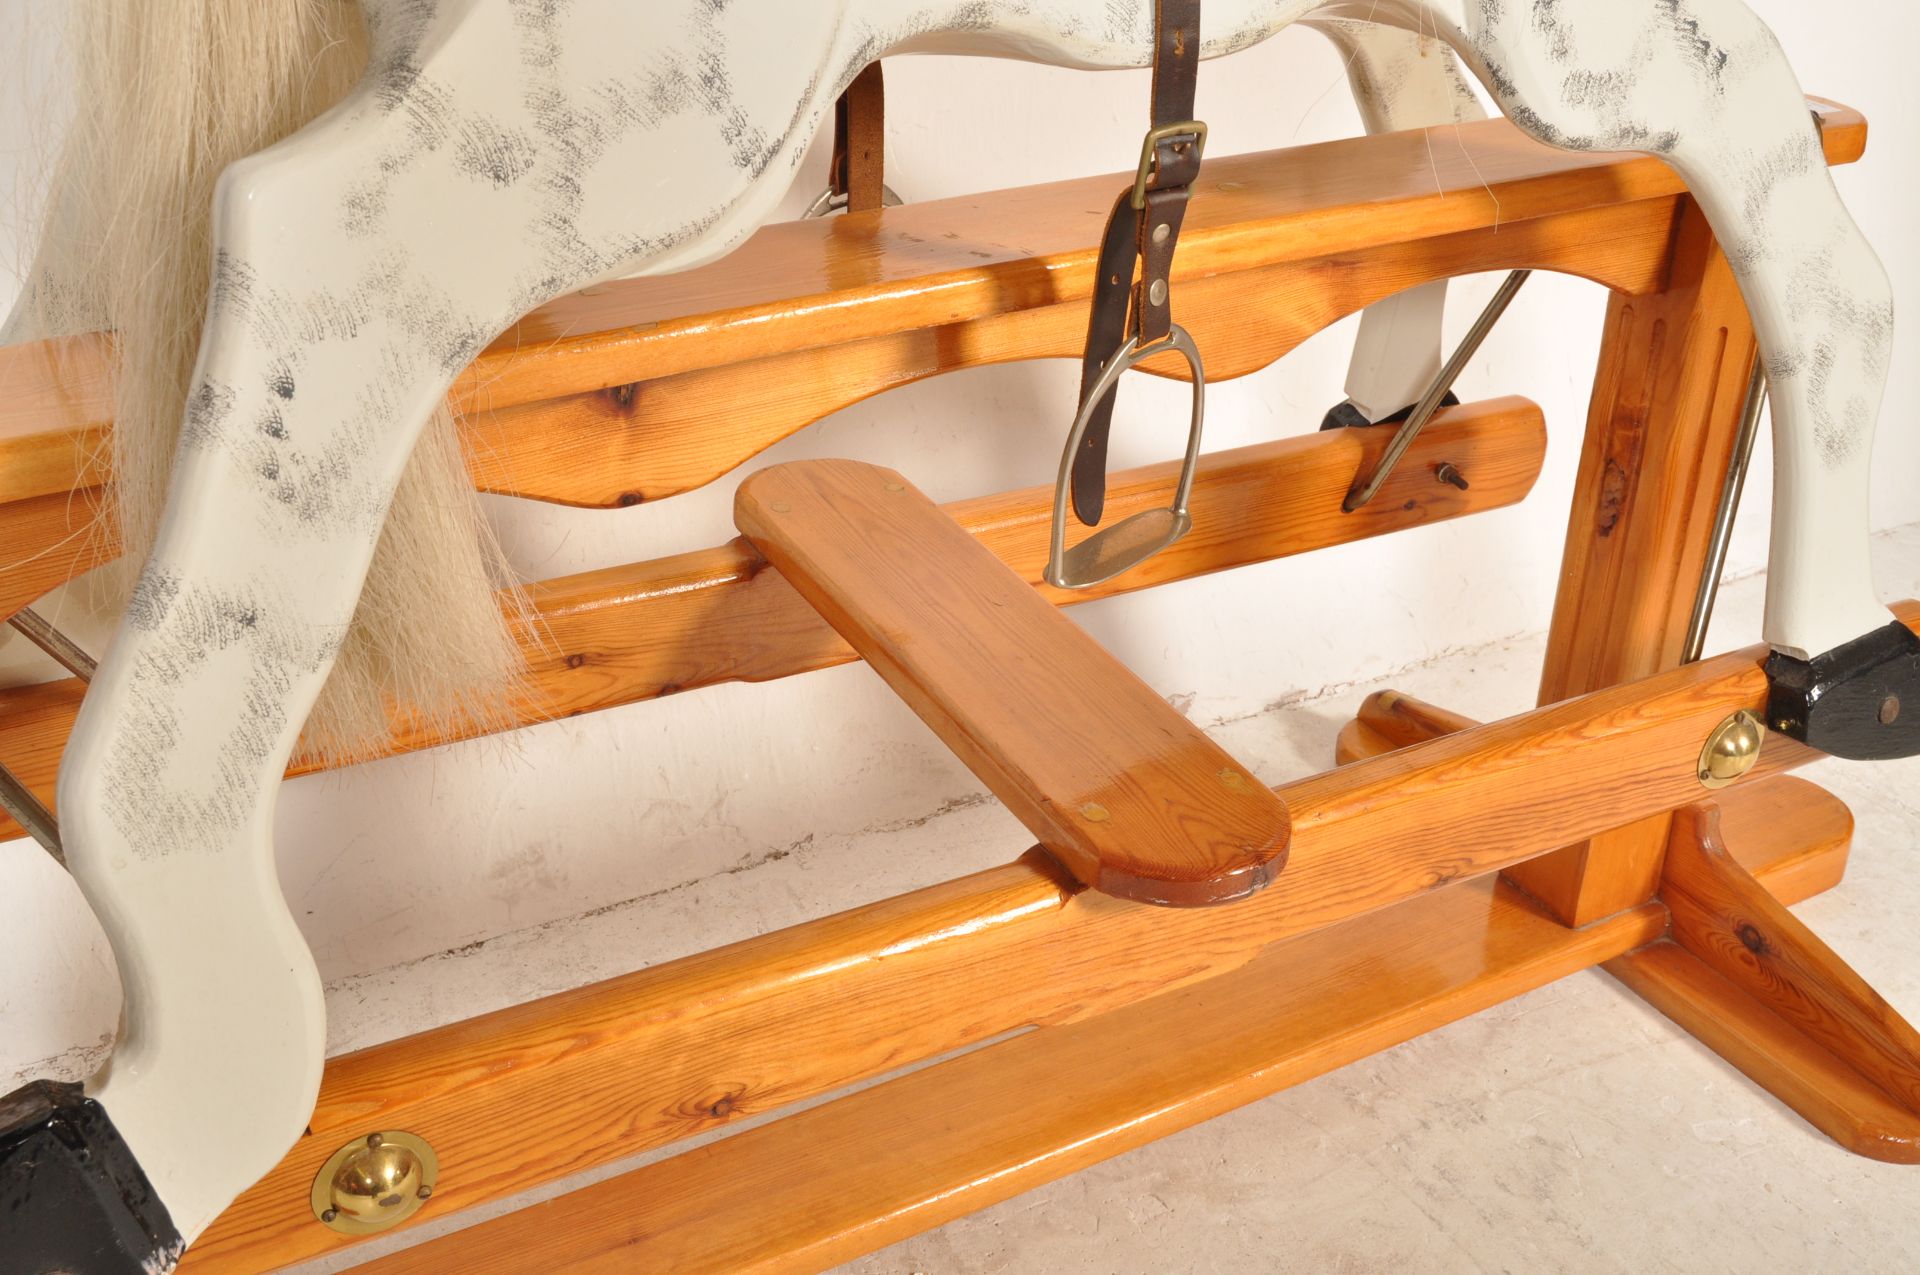 VICTORIAN STYLE WOODEN ROCKING HORSE - Image 5 of 7